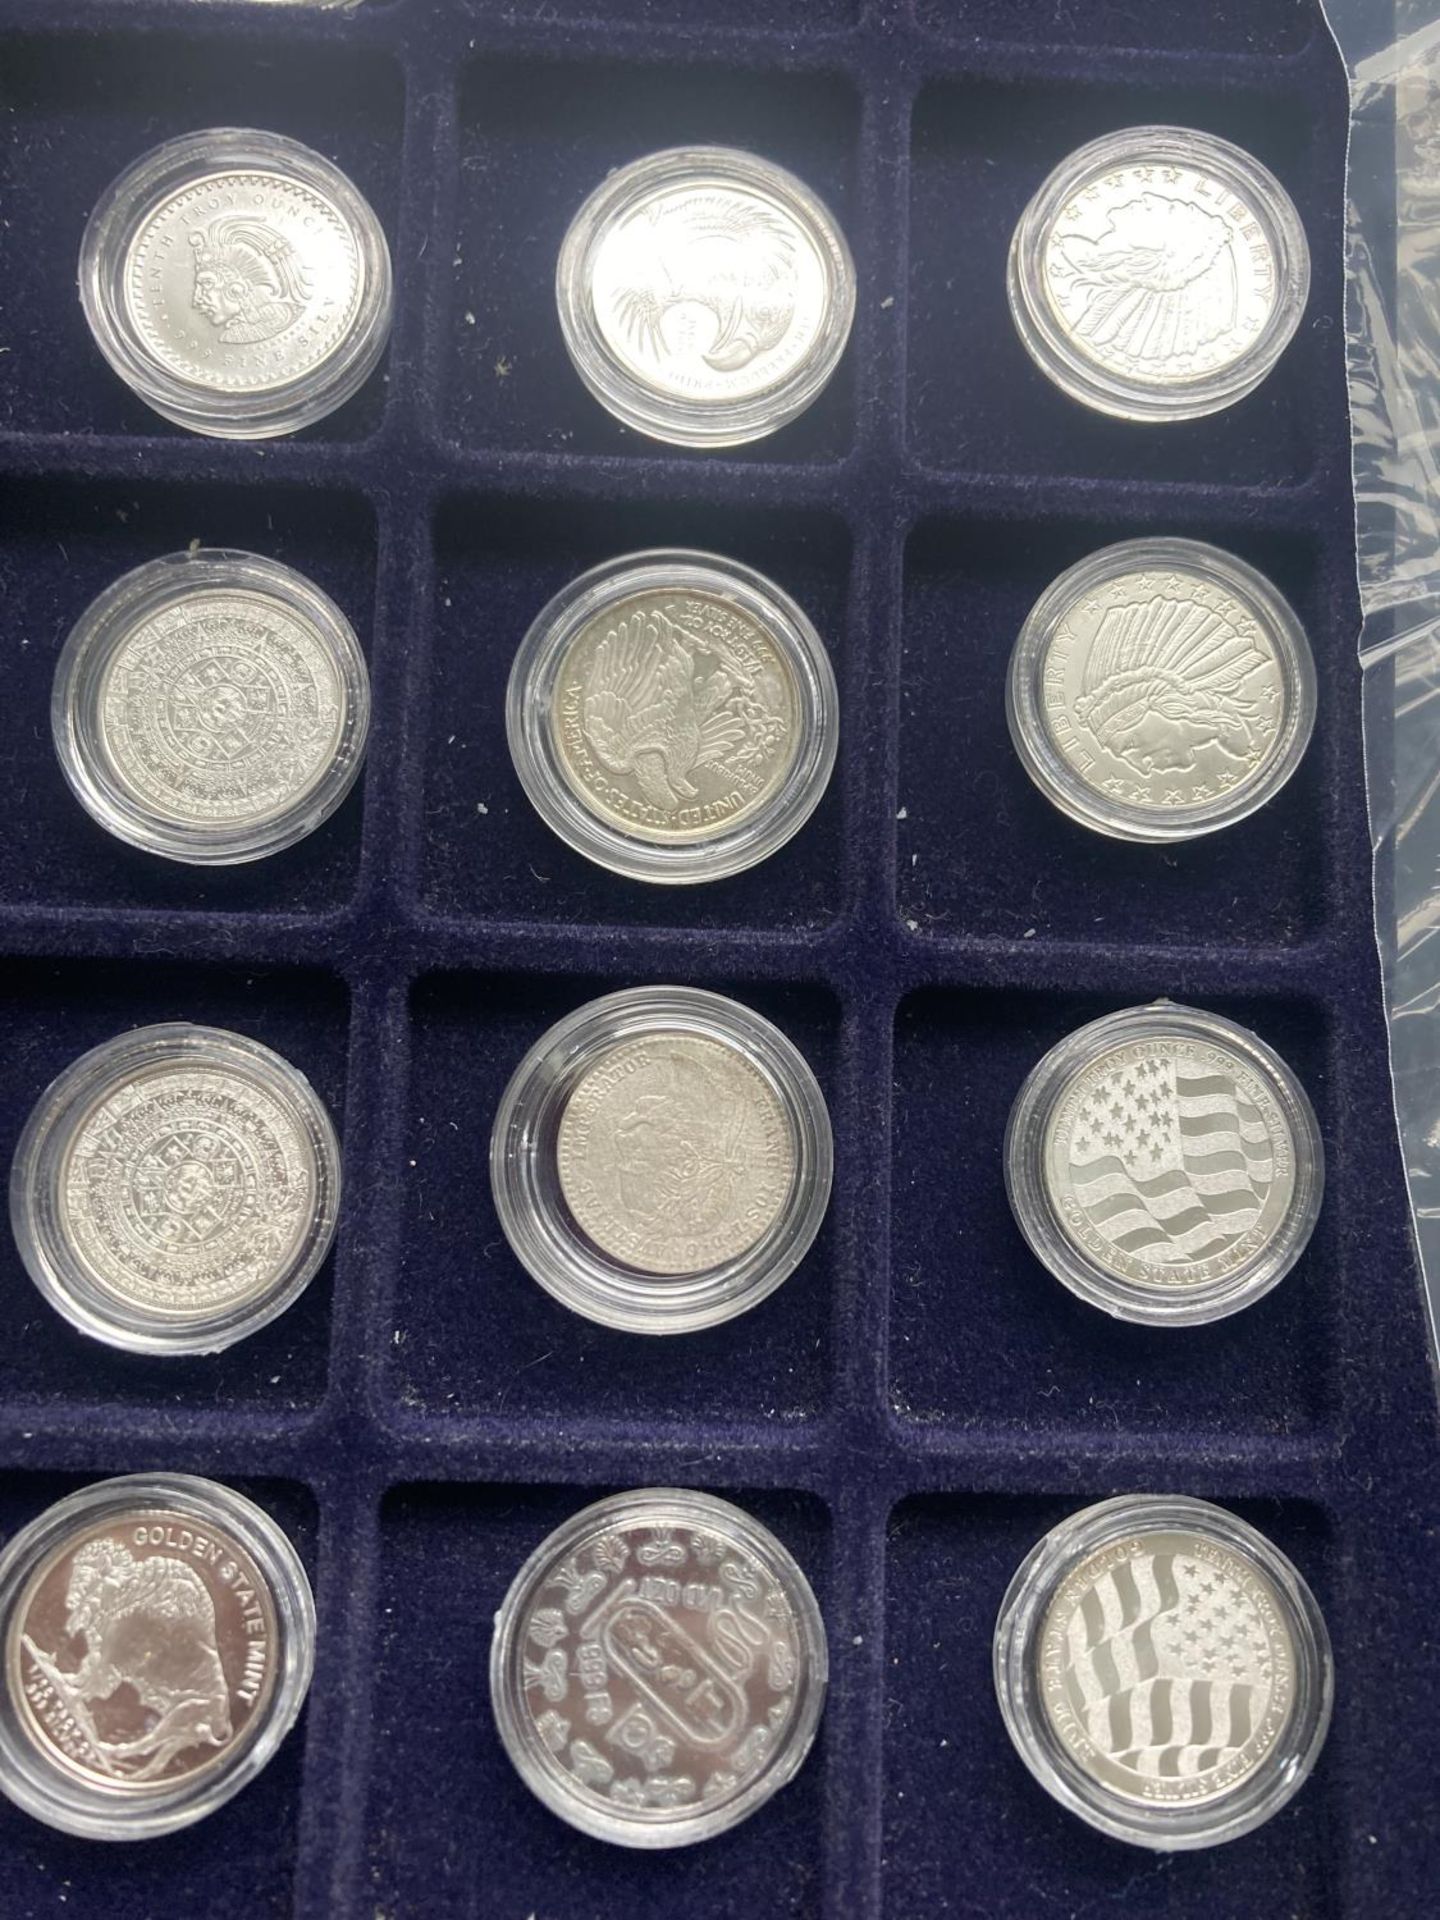 A TRAY CONTAINING EIGHTEEN 1/10 OUNCE PURE SILVER COINS - Image 3 of 4